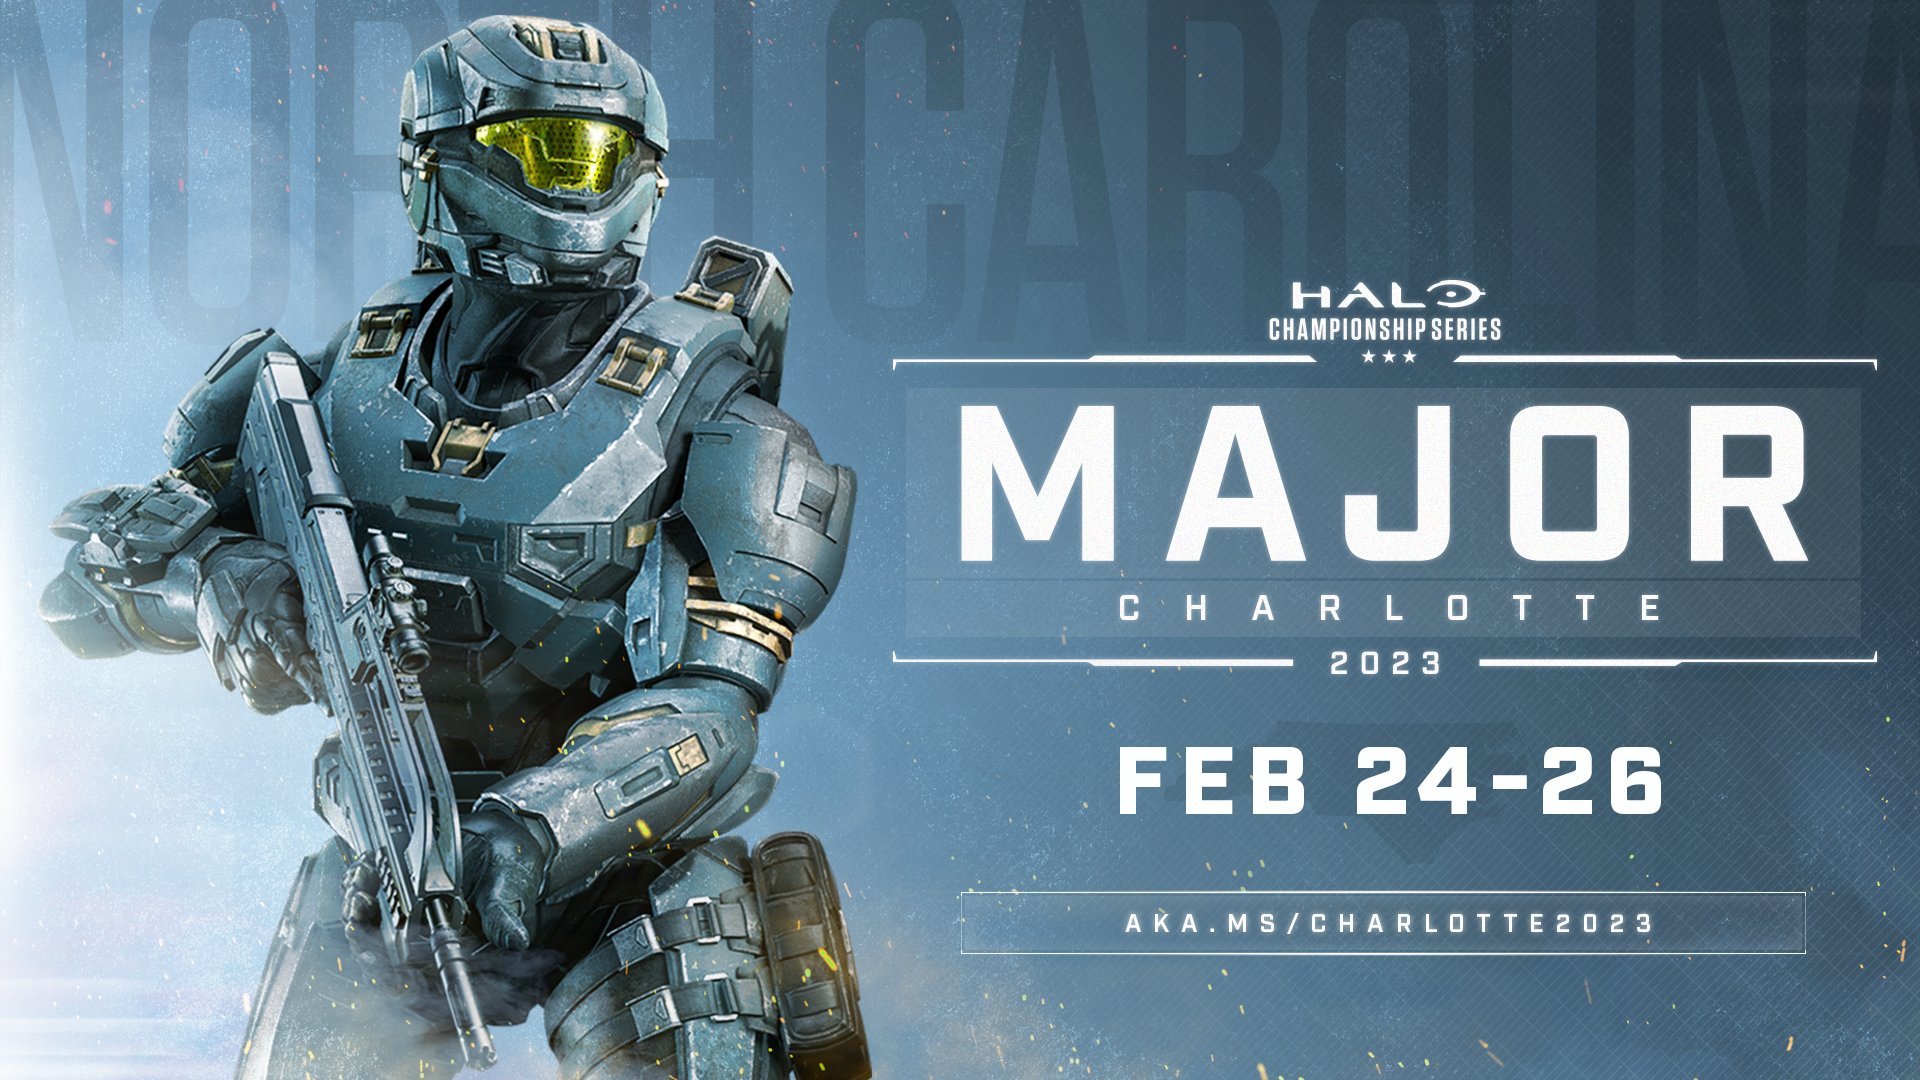 Halo Championship Series Will Officially Have No Crowds